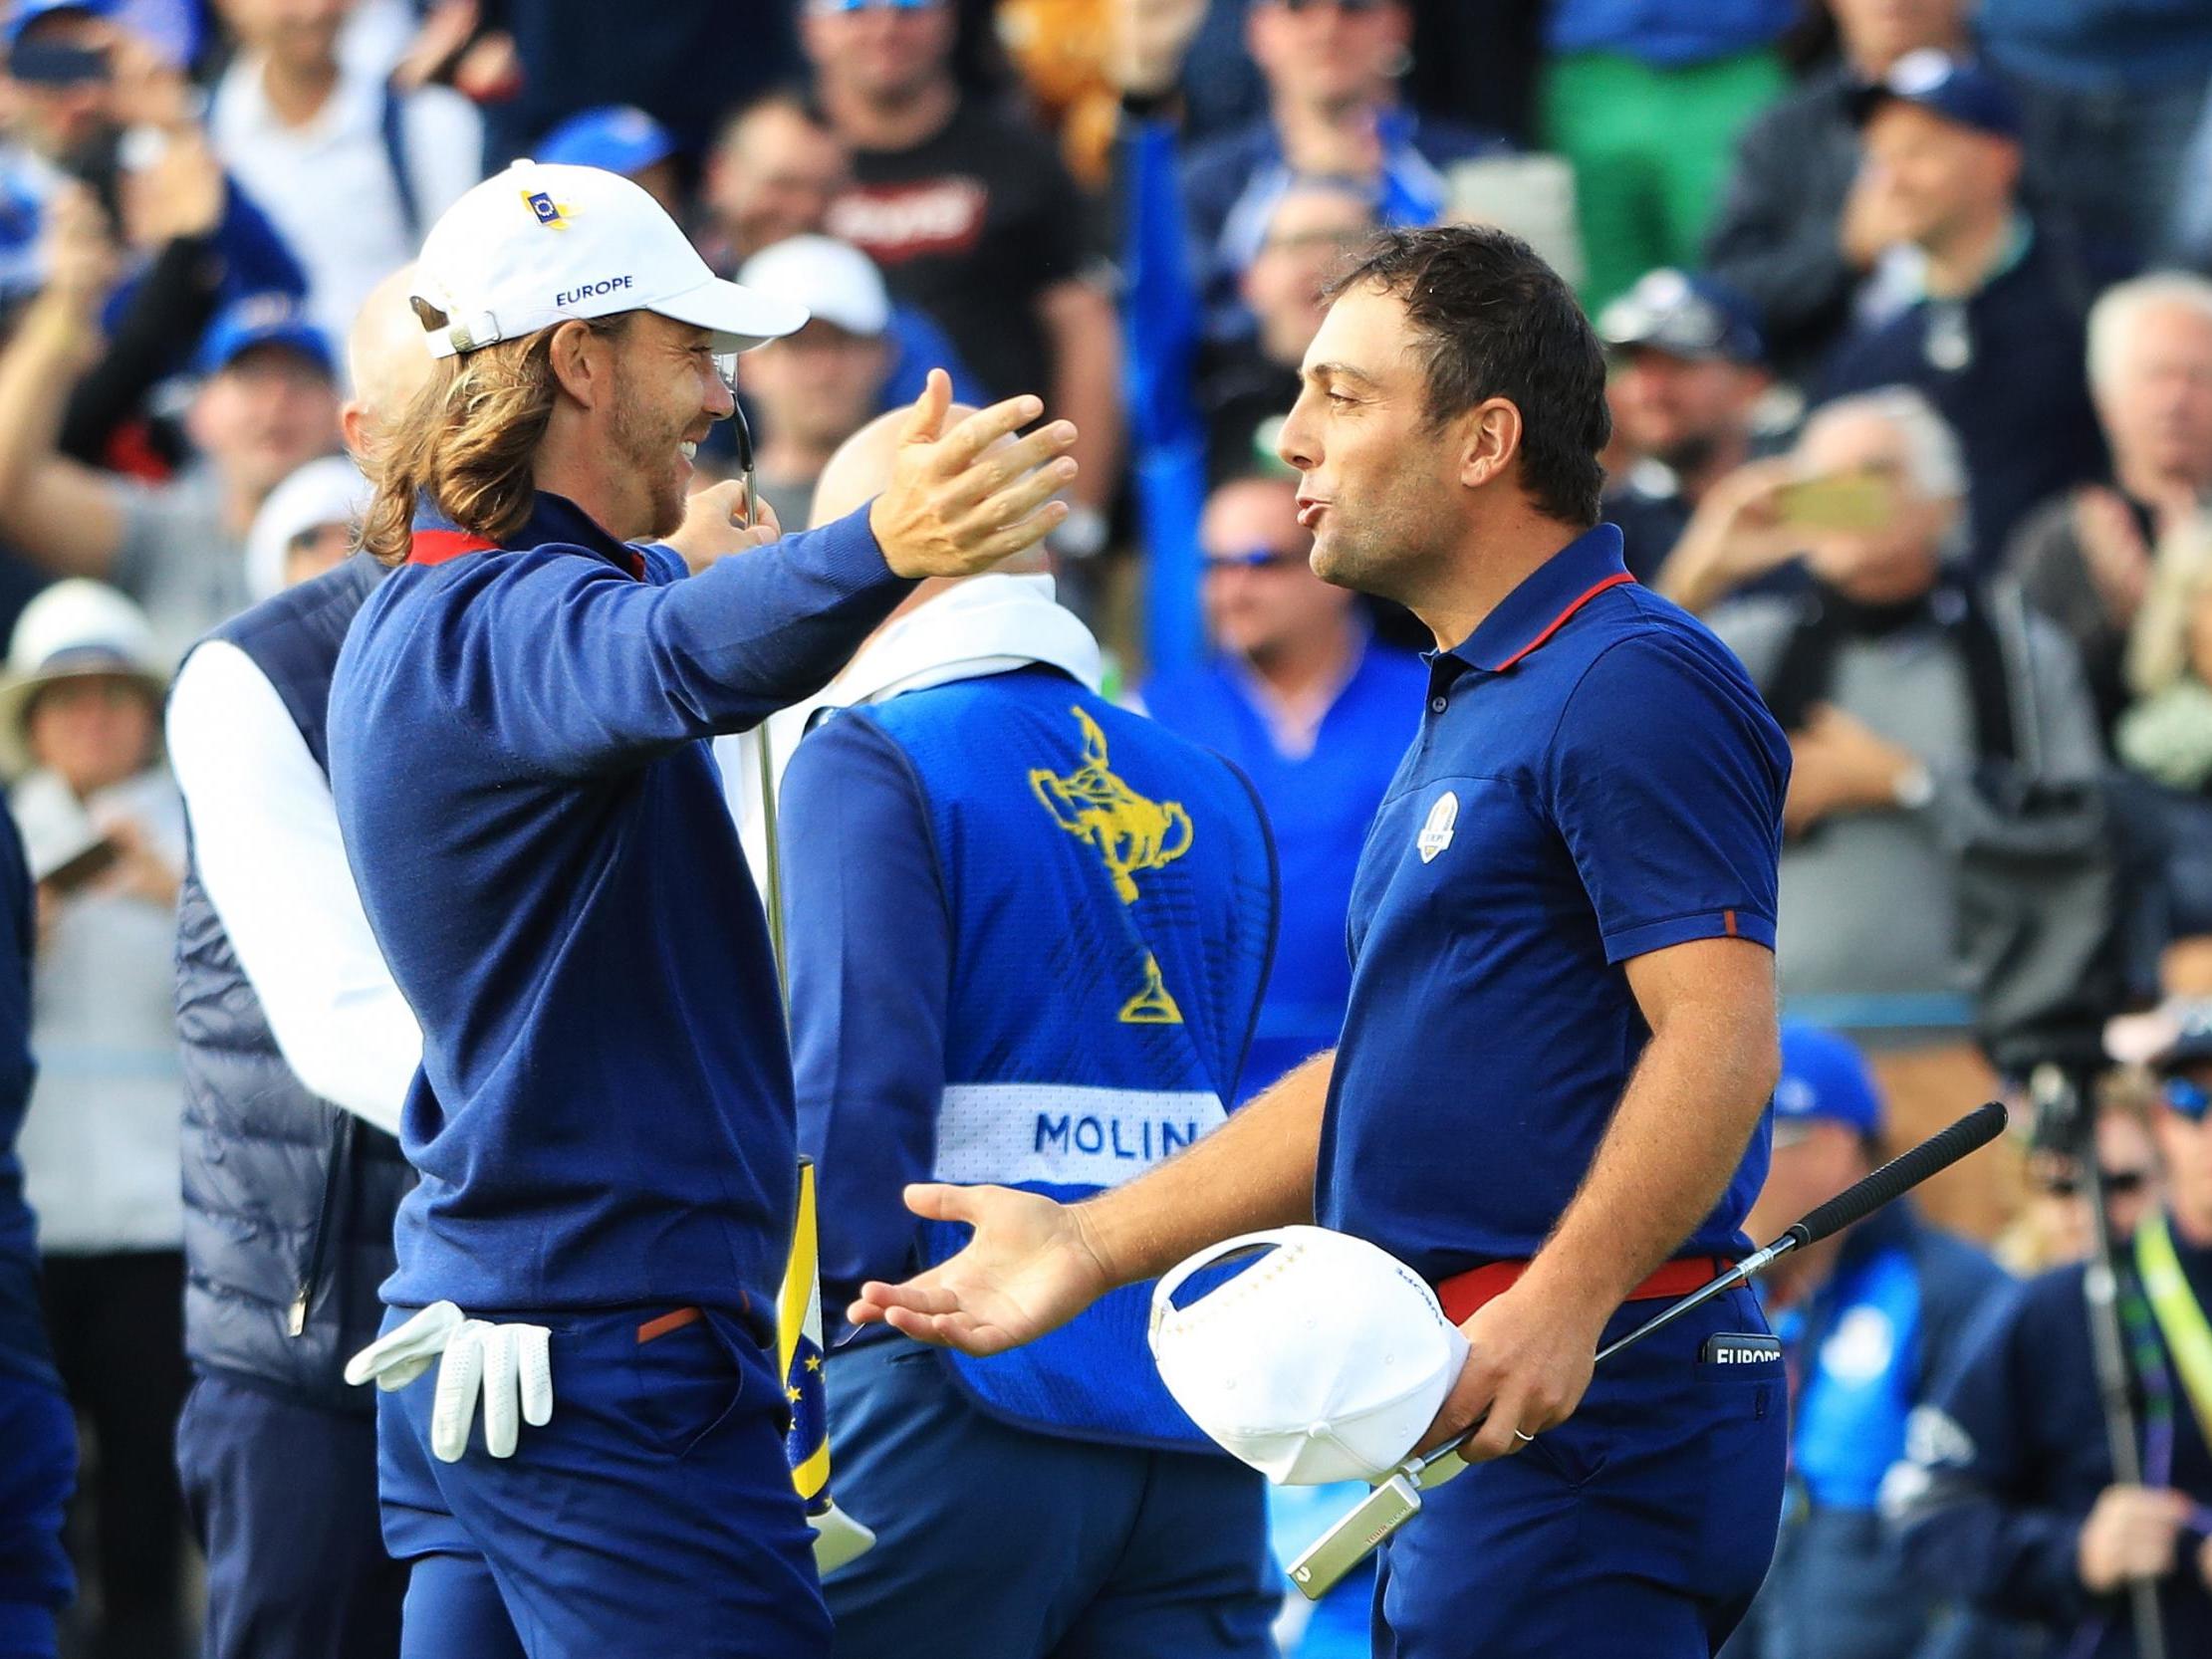 The unlikely pairing of Tommy Fleetwood and Francesco Molinari put in a sublime performance